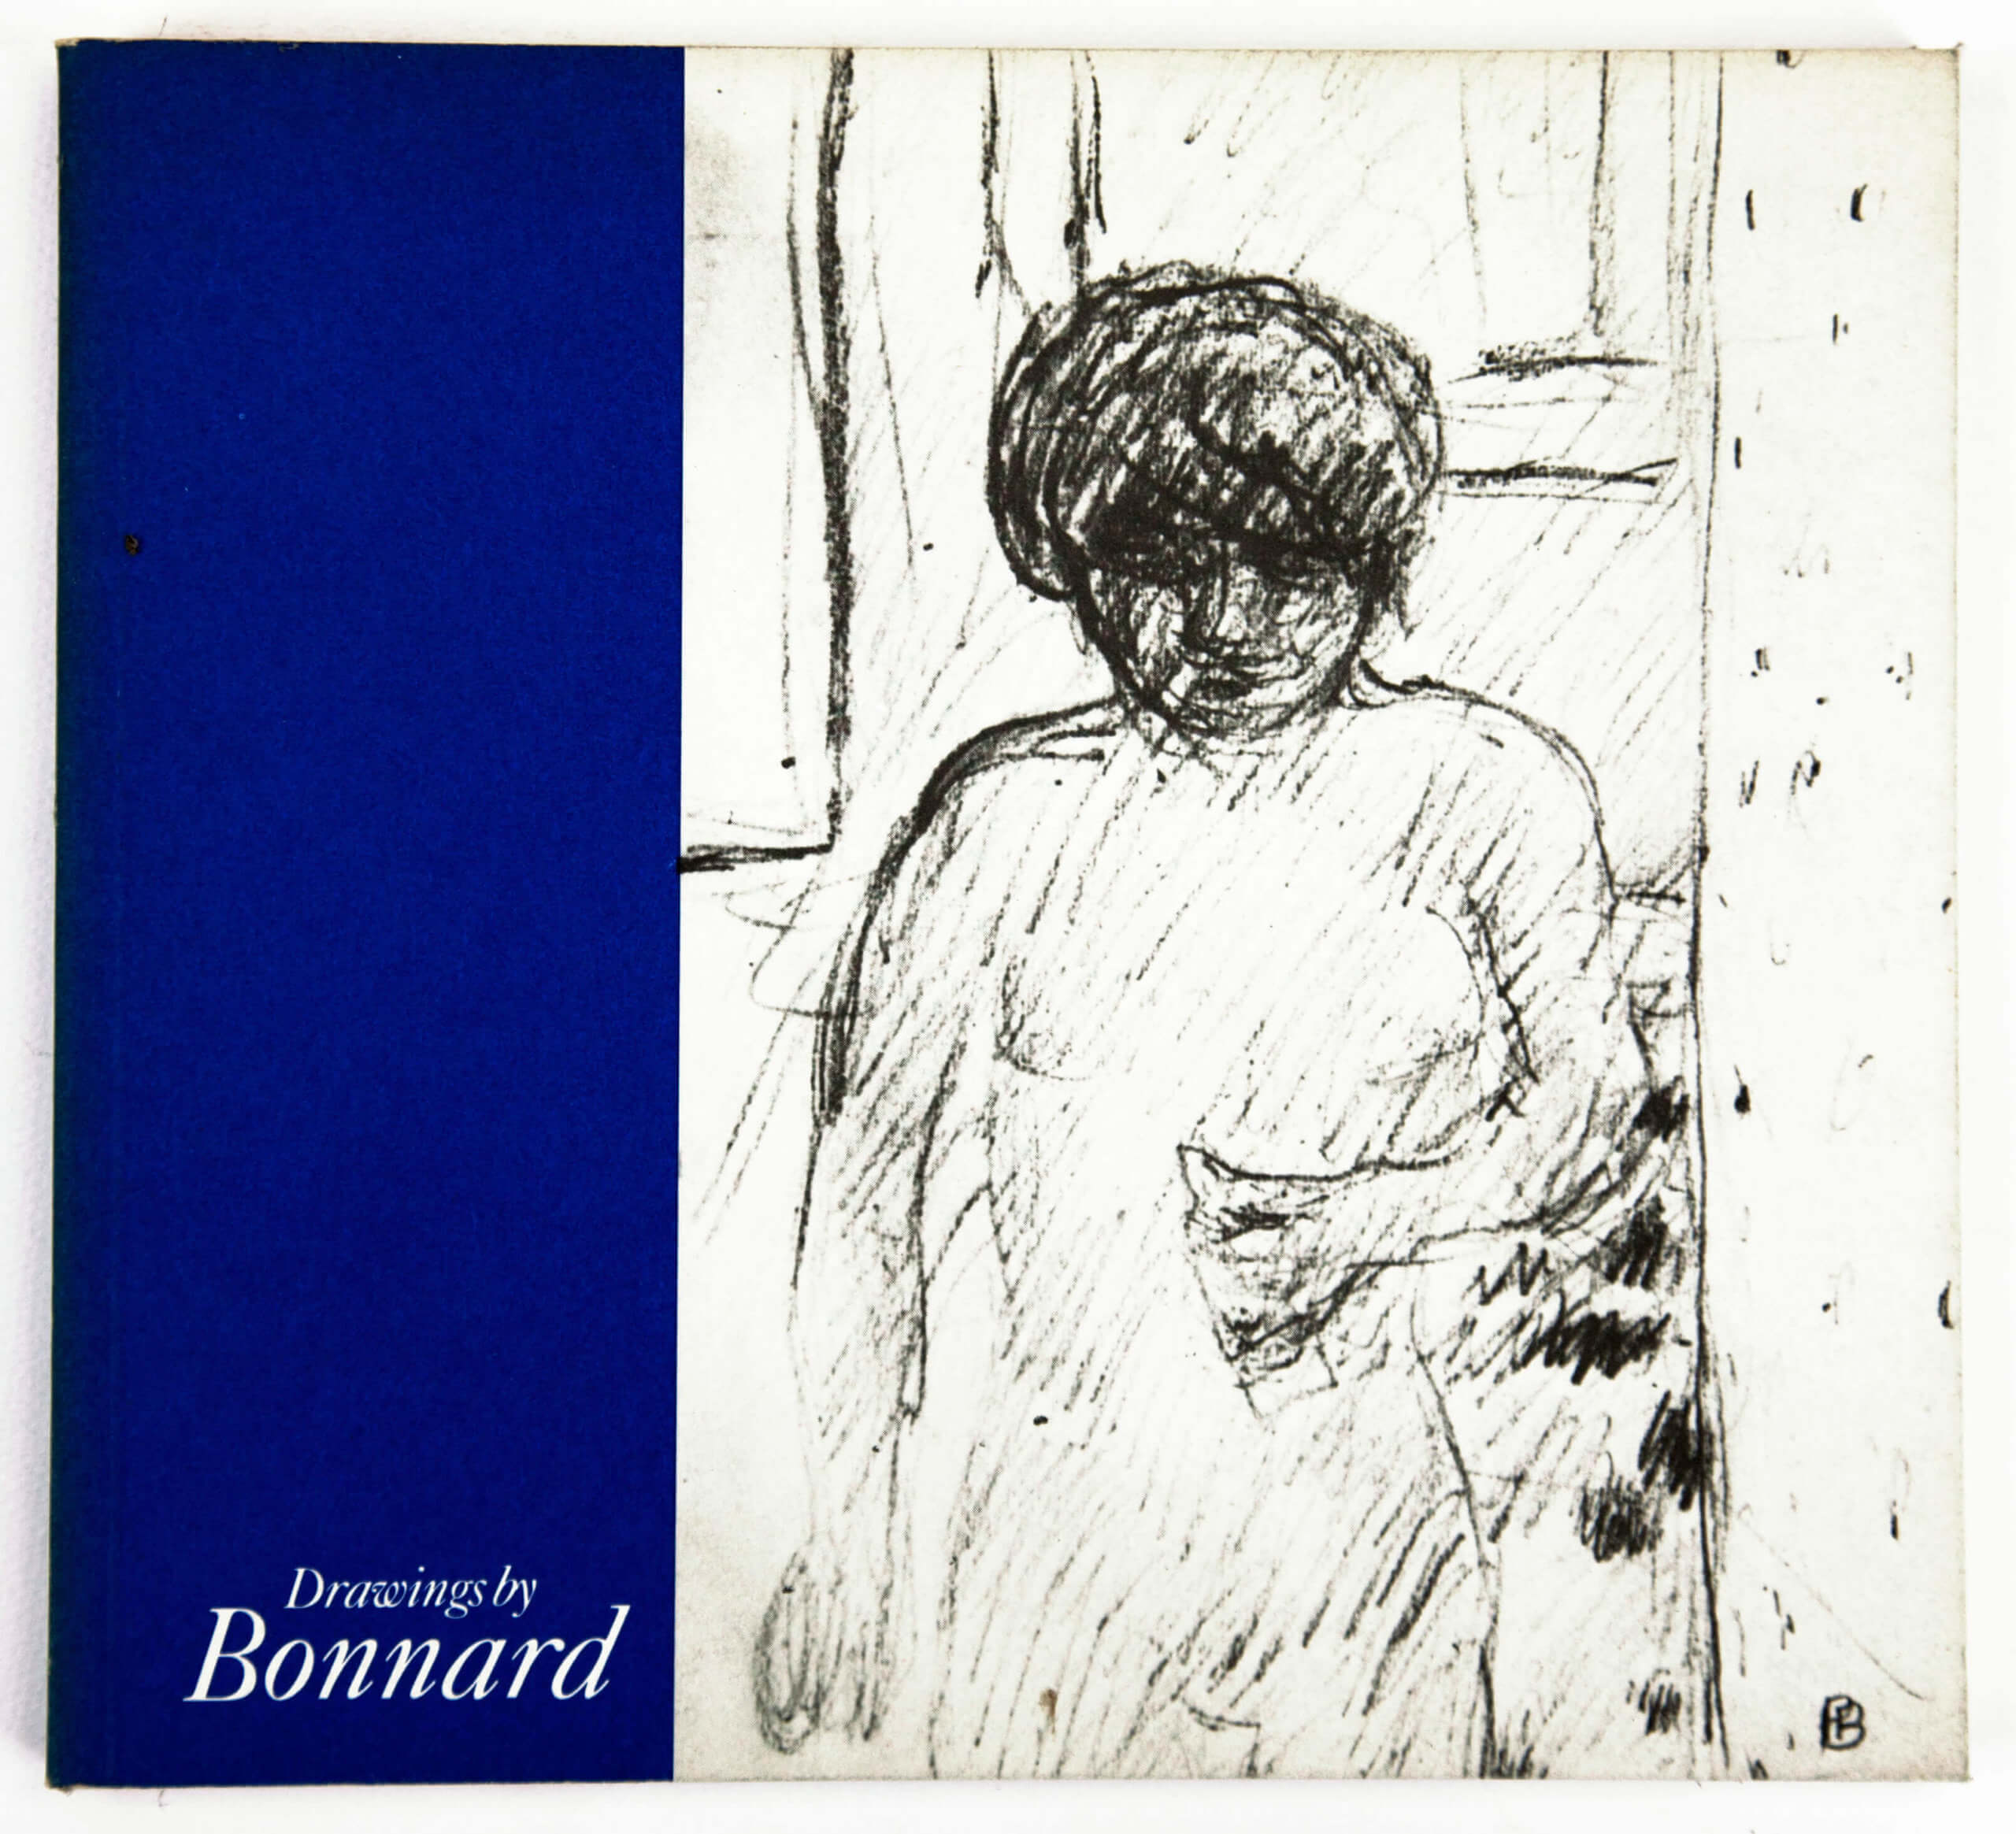 Drawings by Bonnard at The Hayward Gallery, exhibition catalogue. Text by Text by Sargy Mann